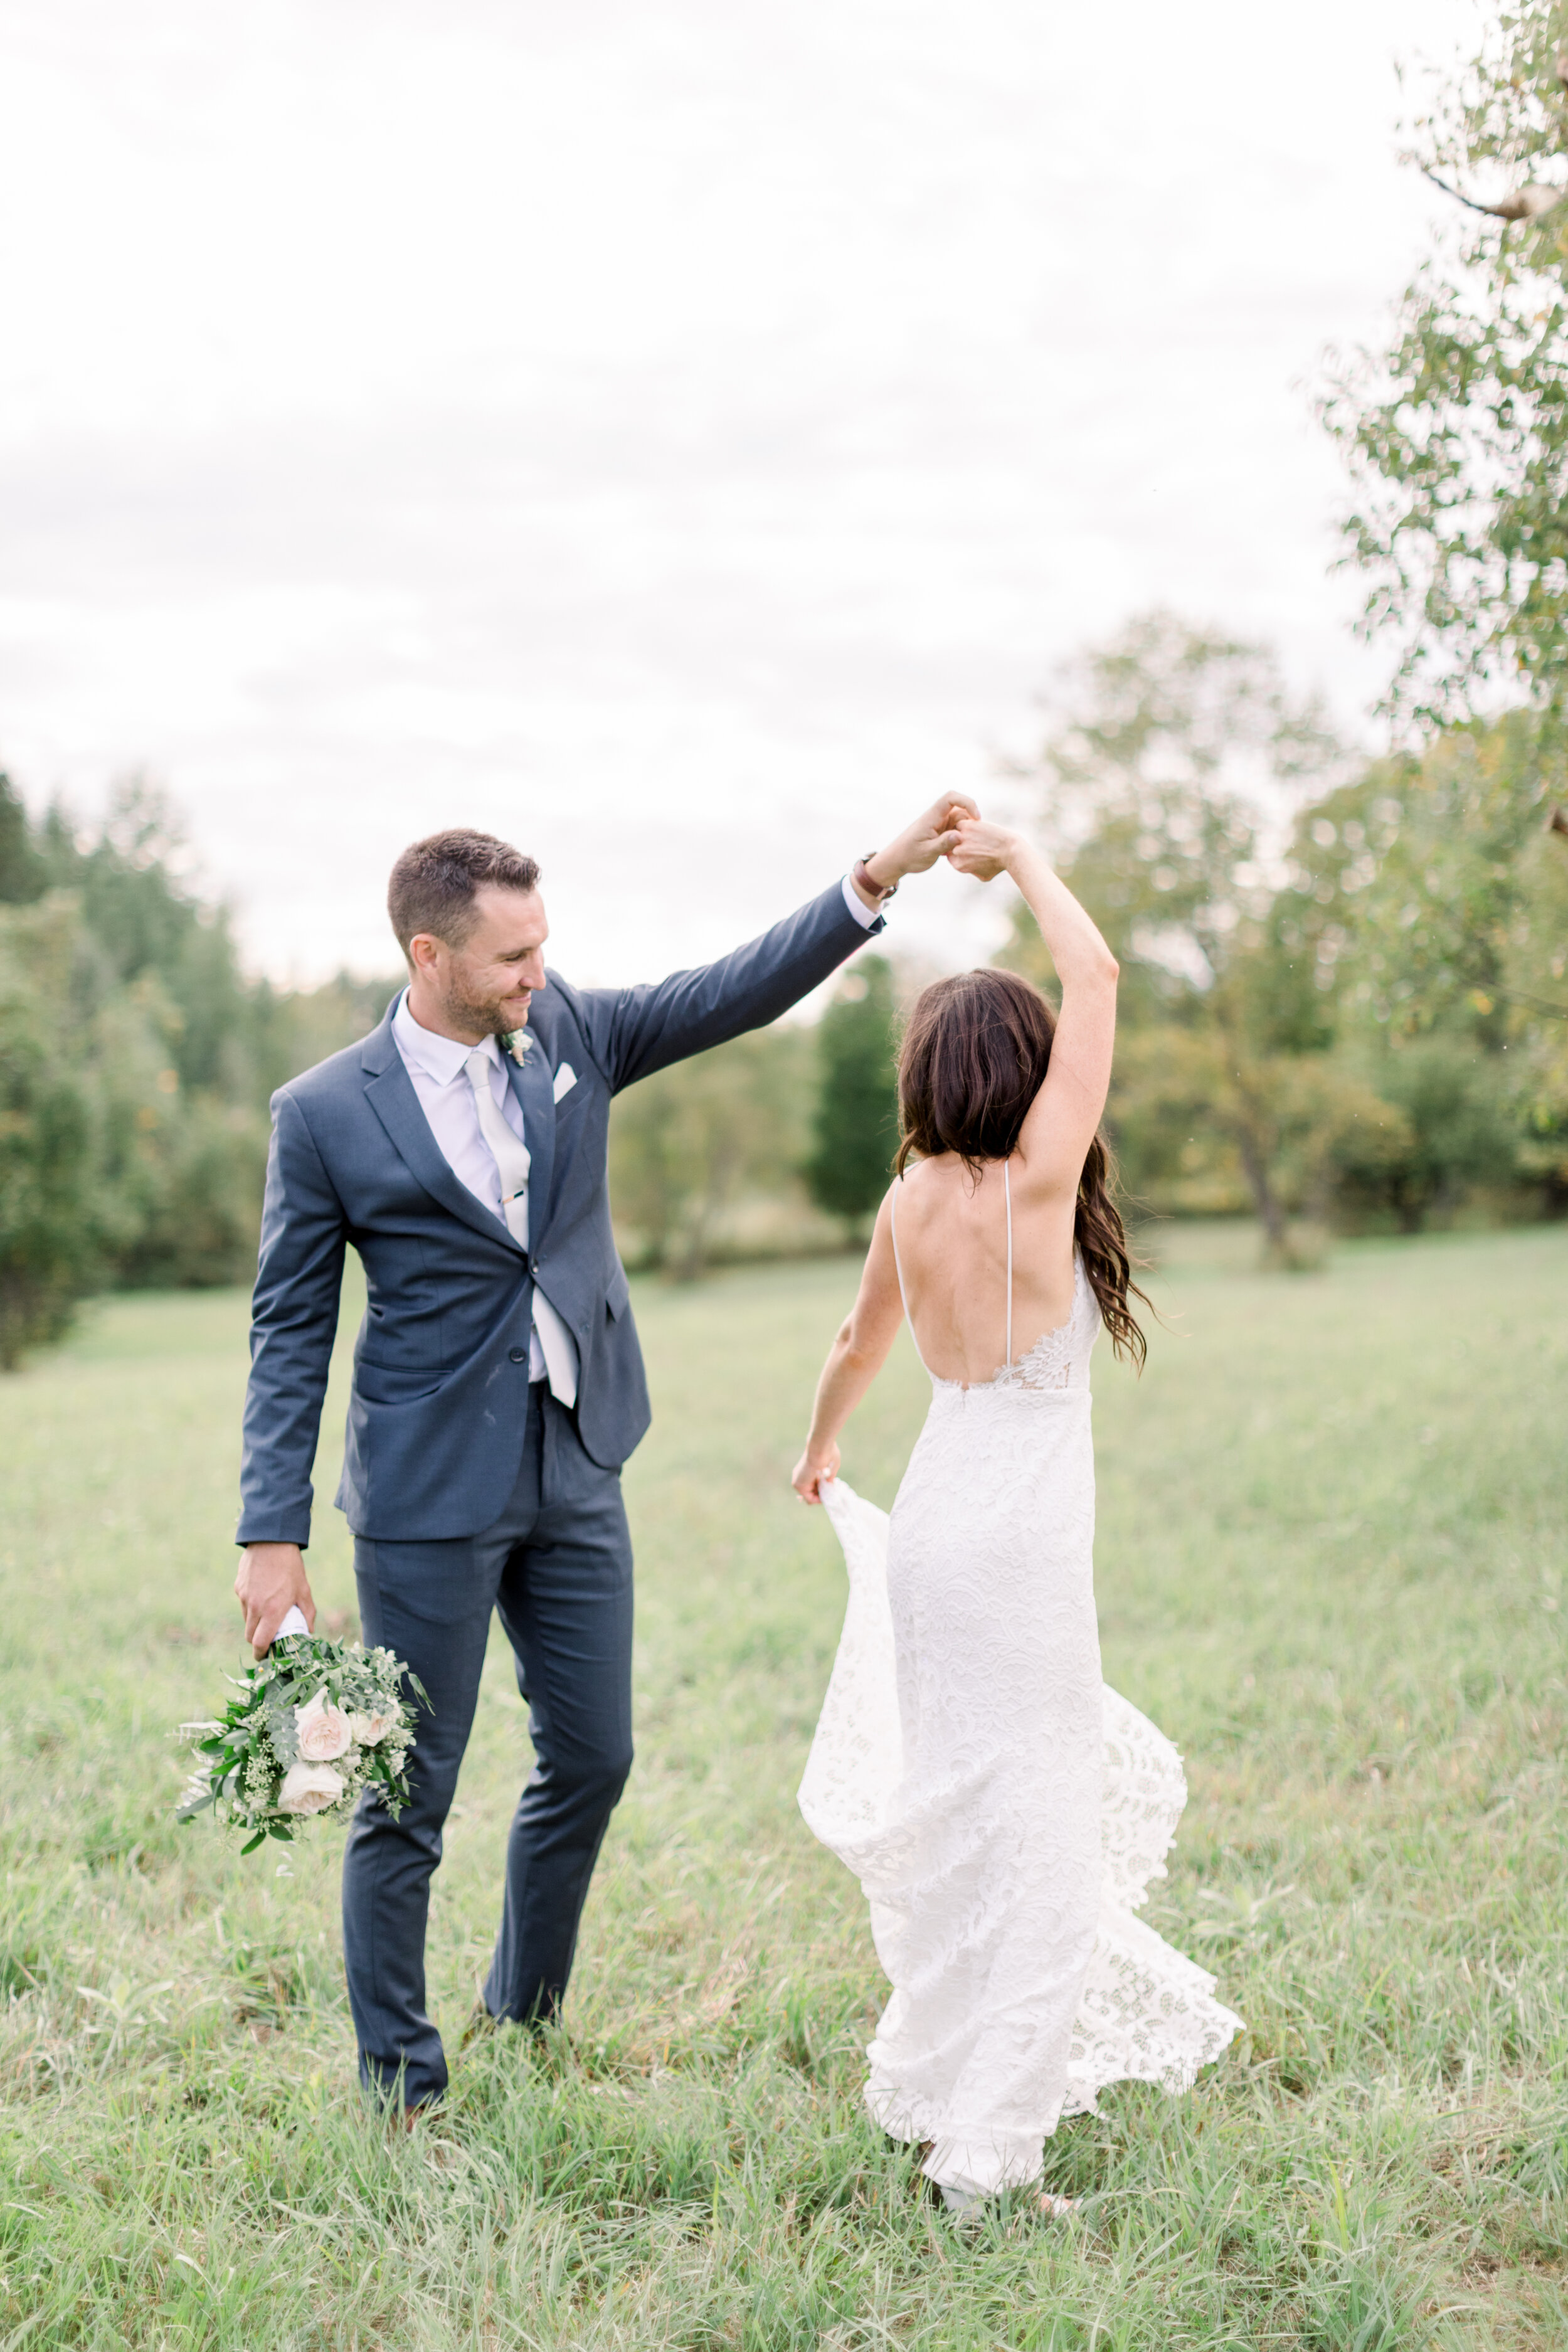  The bride and groom celebrate their marriage with a little dance in Kinmount, Ontario captured by Chelsea Mason Photography. Bride and groom first dance wedding pics inspo lovers white wedding dress lace blue gray suit wedding attire ottawa wedding 